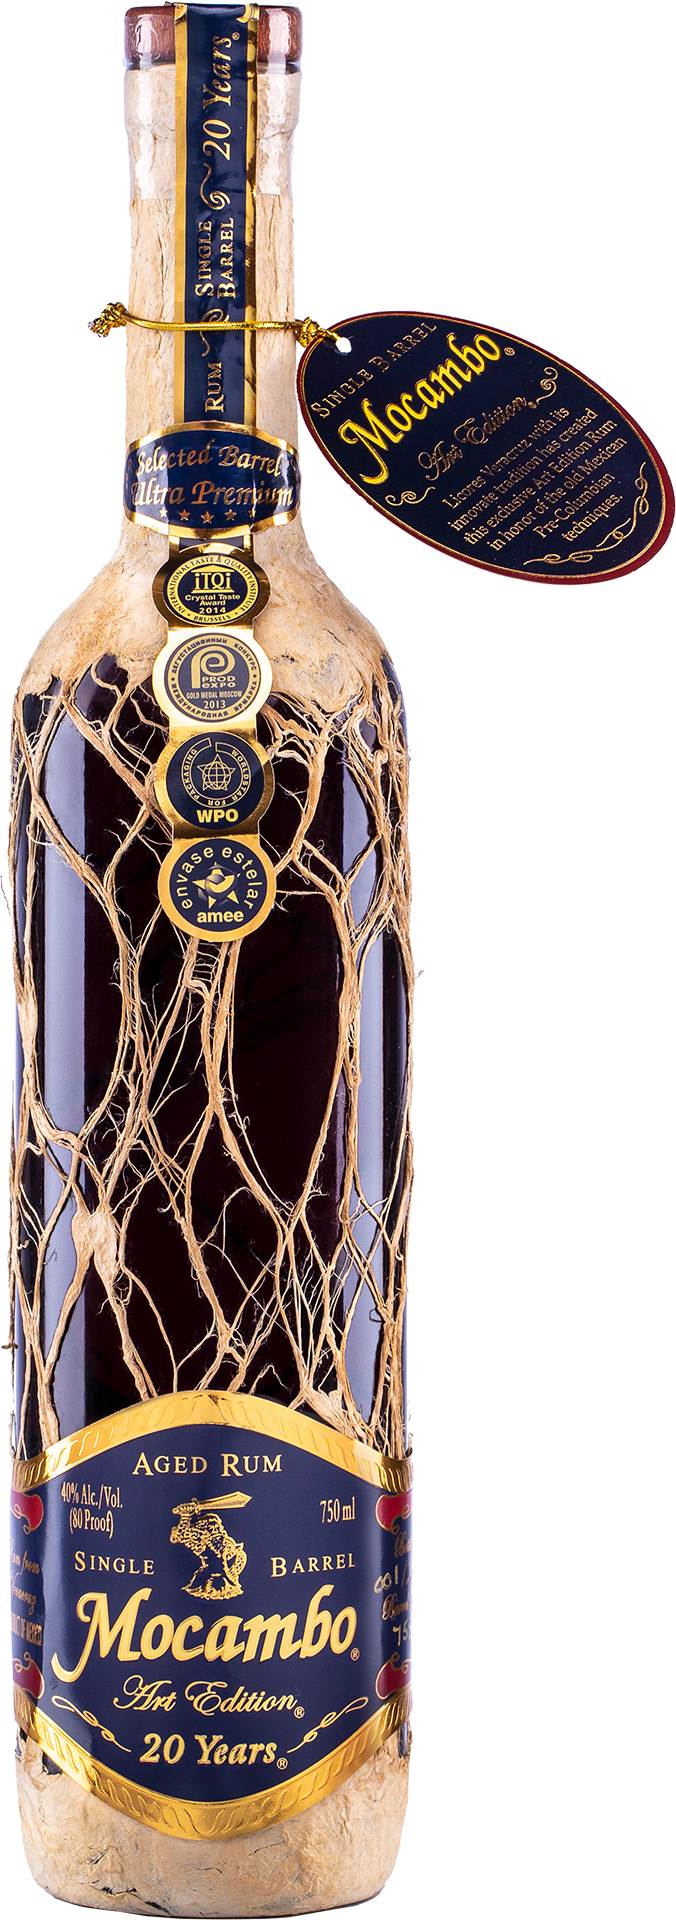 An image of a bottle of Ron Mocambo Art Edition 20 Year Old Dark Rum 